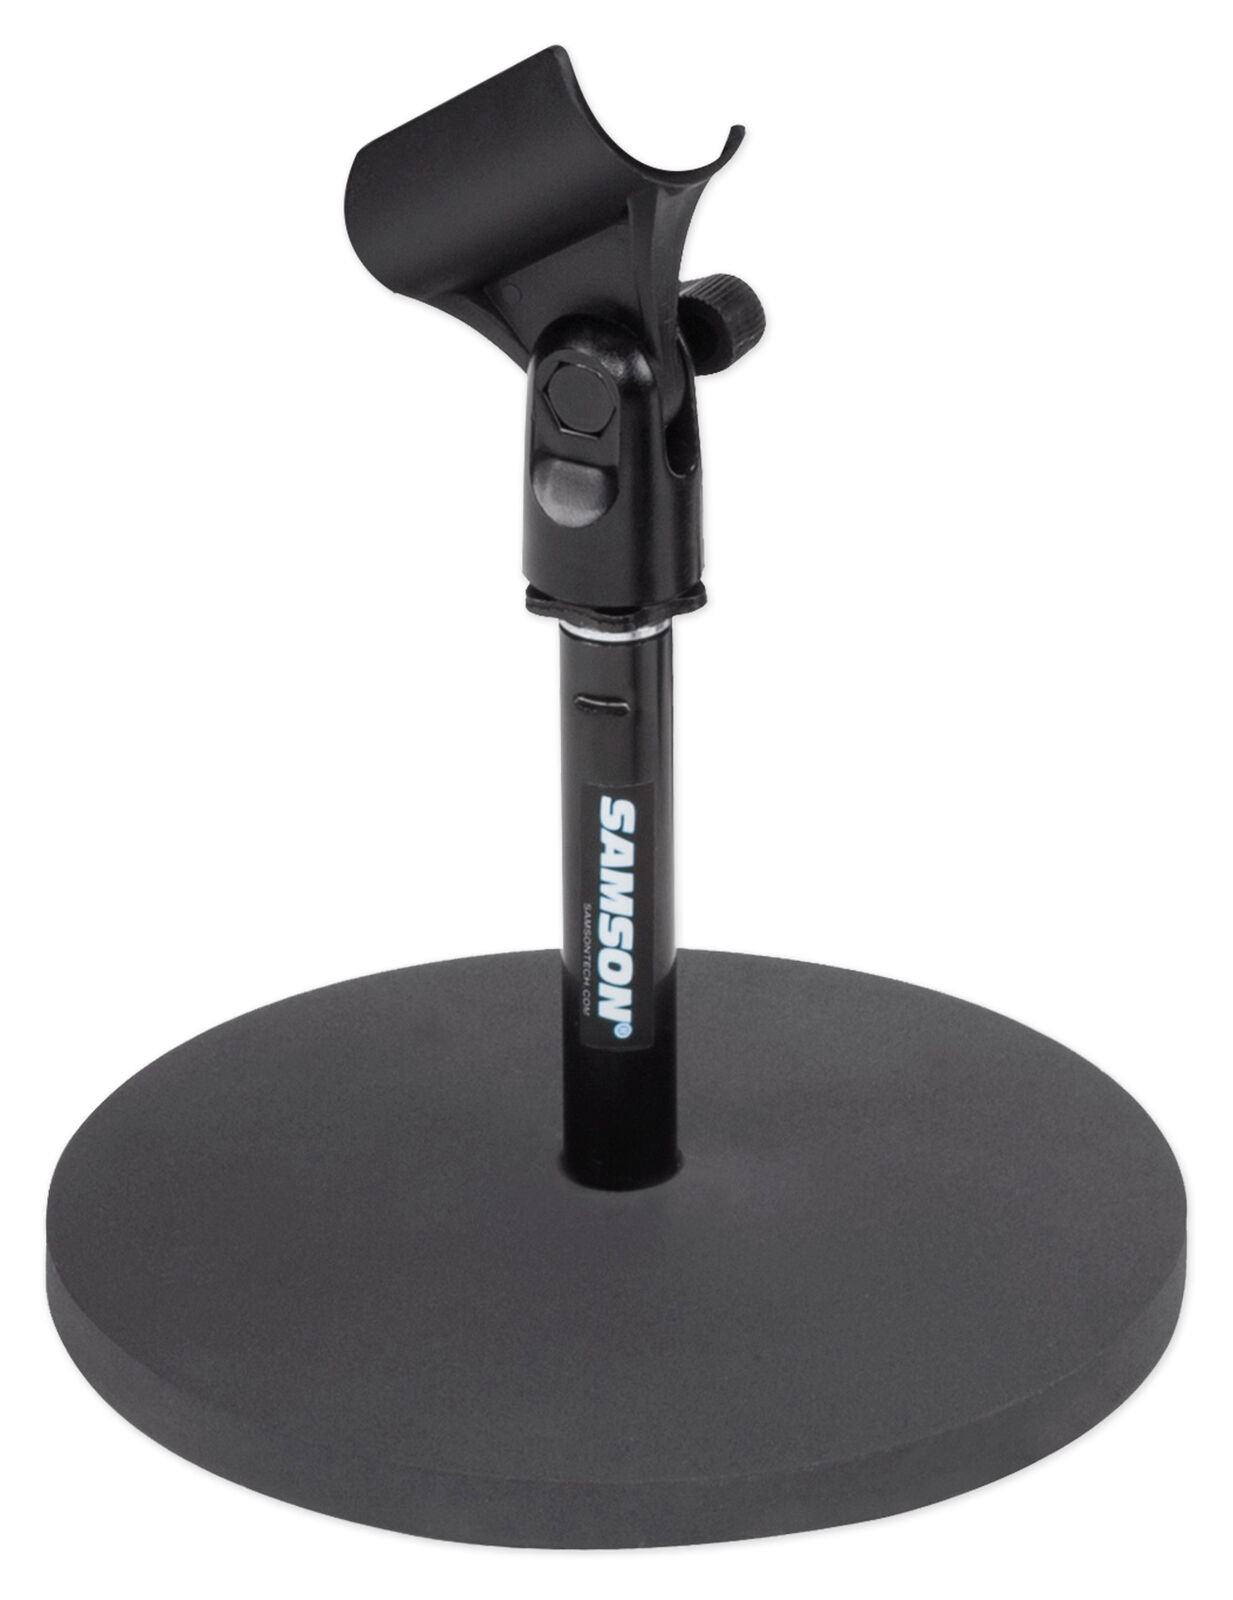 Samson MD5 Desktop Mic Stand w/ Weighted Base+Clip 4 Recording, Studio, Podcast